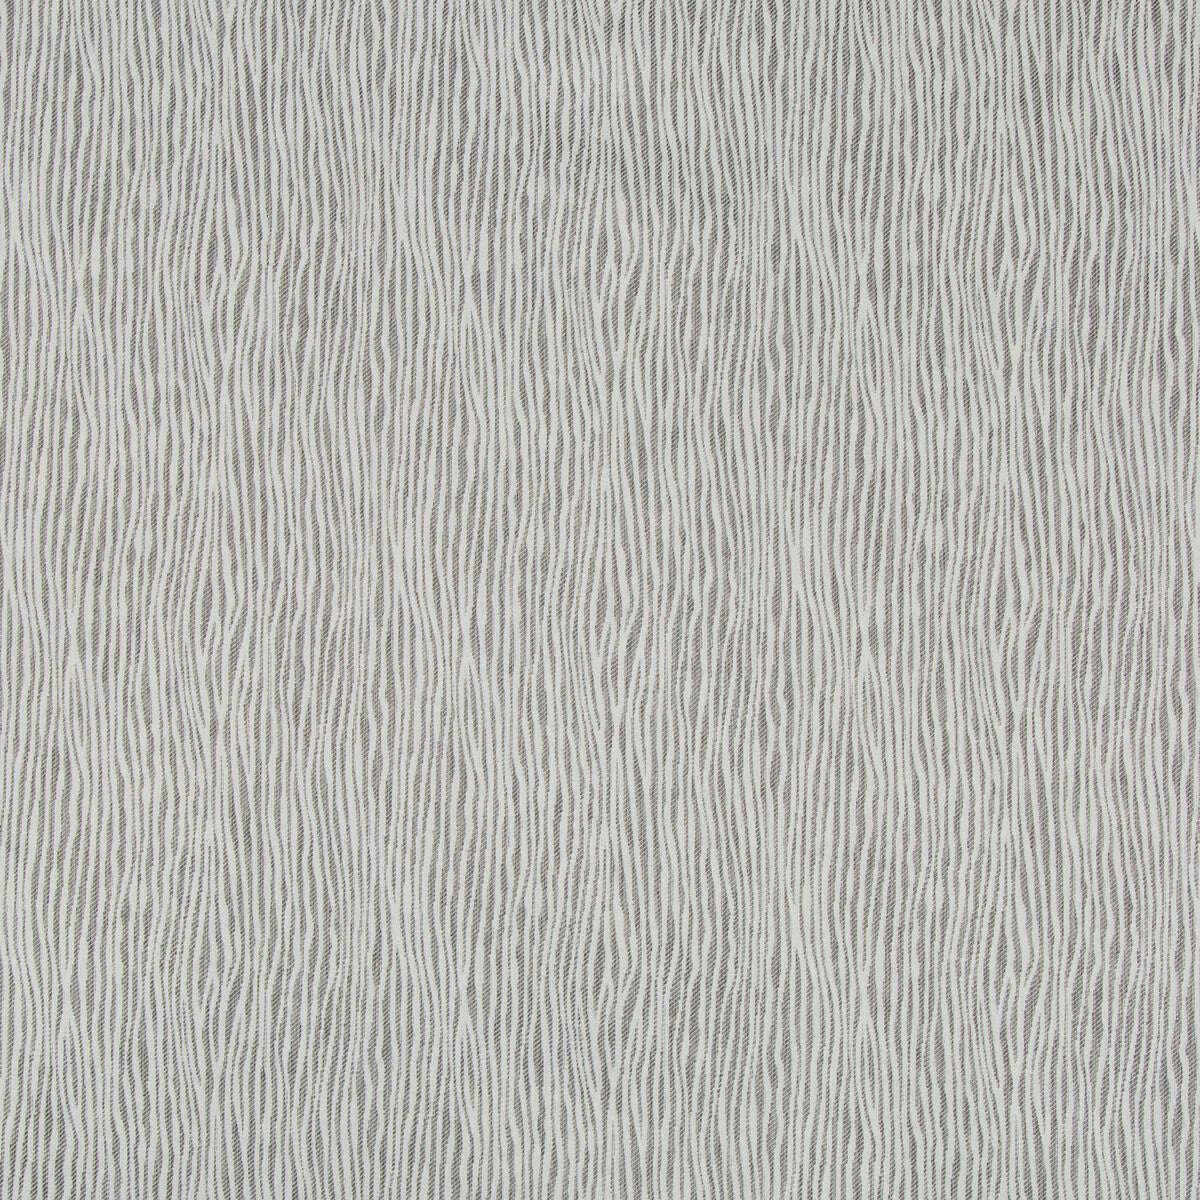 Stringer fabric in graphite color - pattern 35058.21.0 - by Kravet Basics in the Jeffrey Alan Marks Oceanview collection